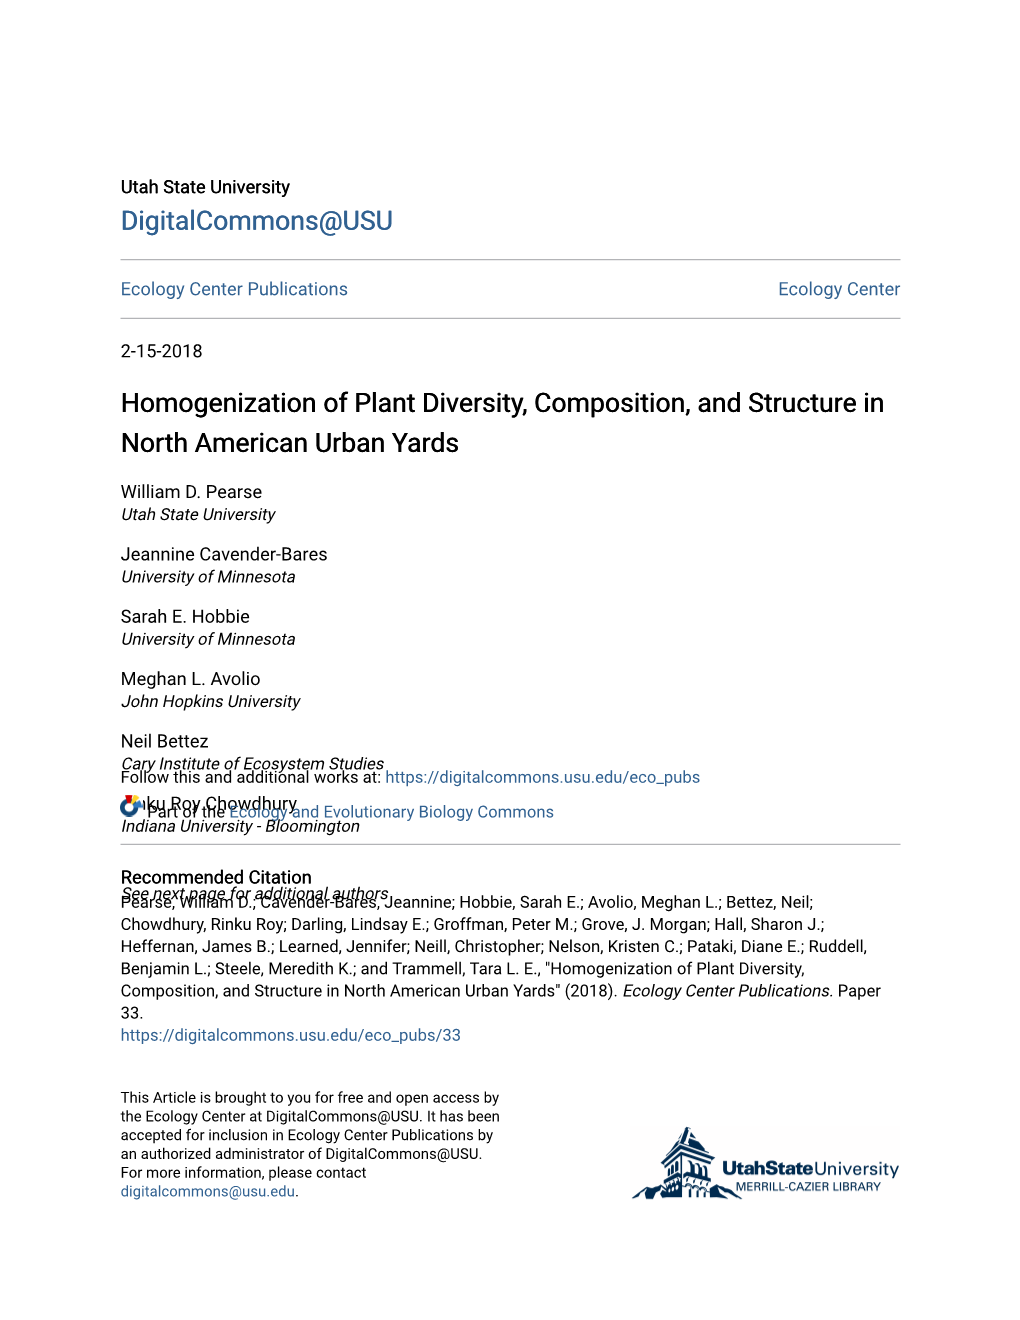 Homogenization of Plant Diversity, Composition, and Structure in North American Urban Yards